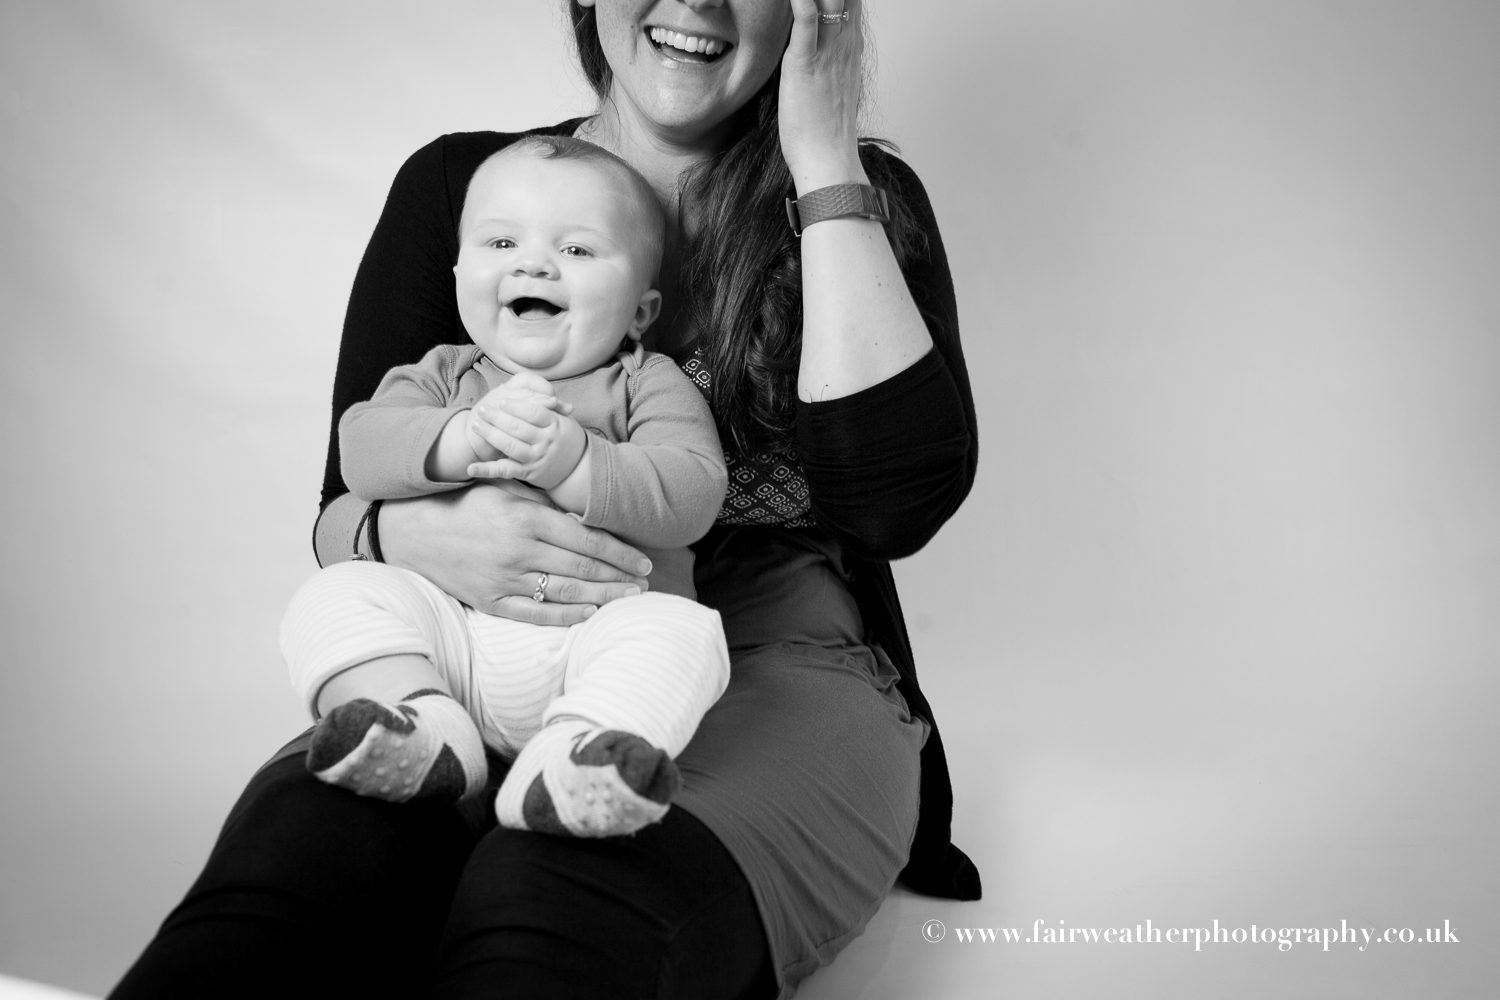 Baby and family photographer in Essex, Cambridge, Hertfordshire and Suffolk